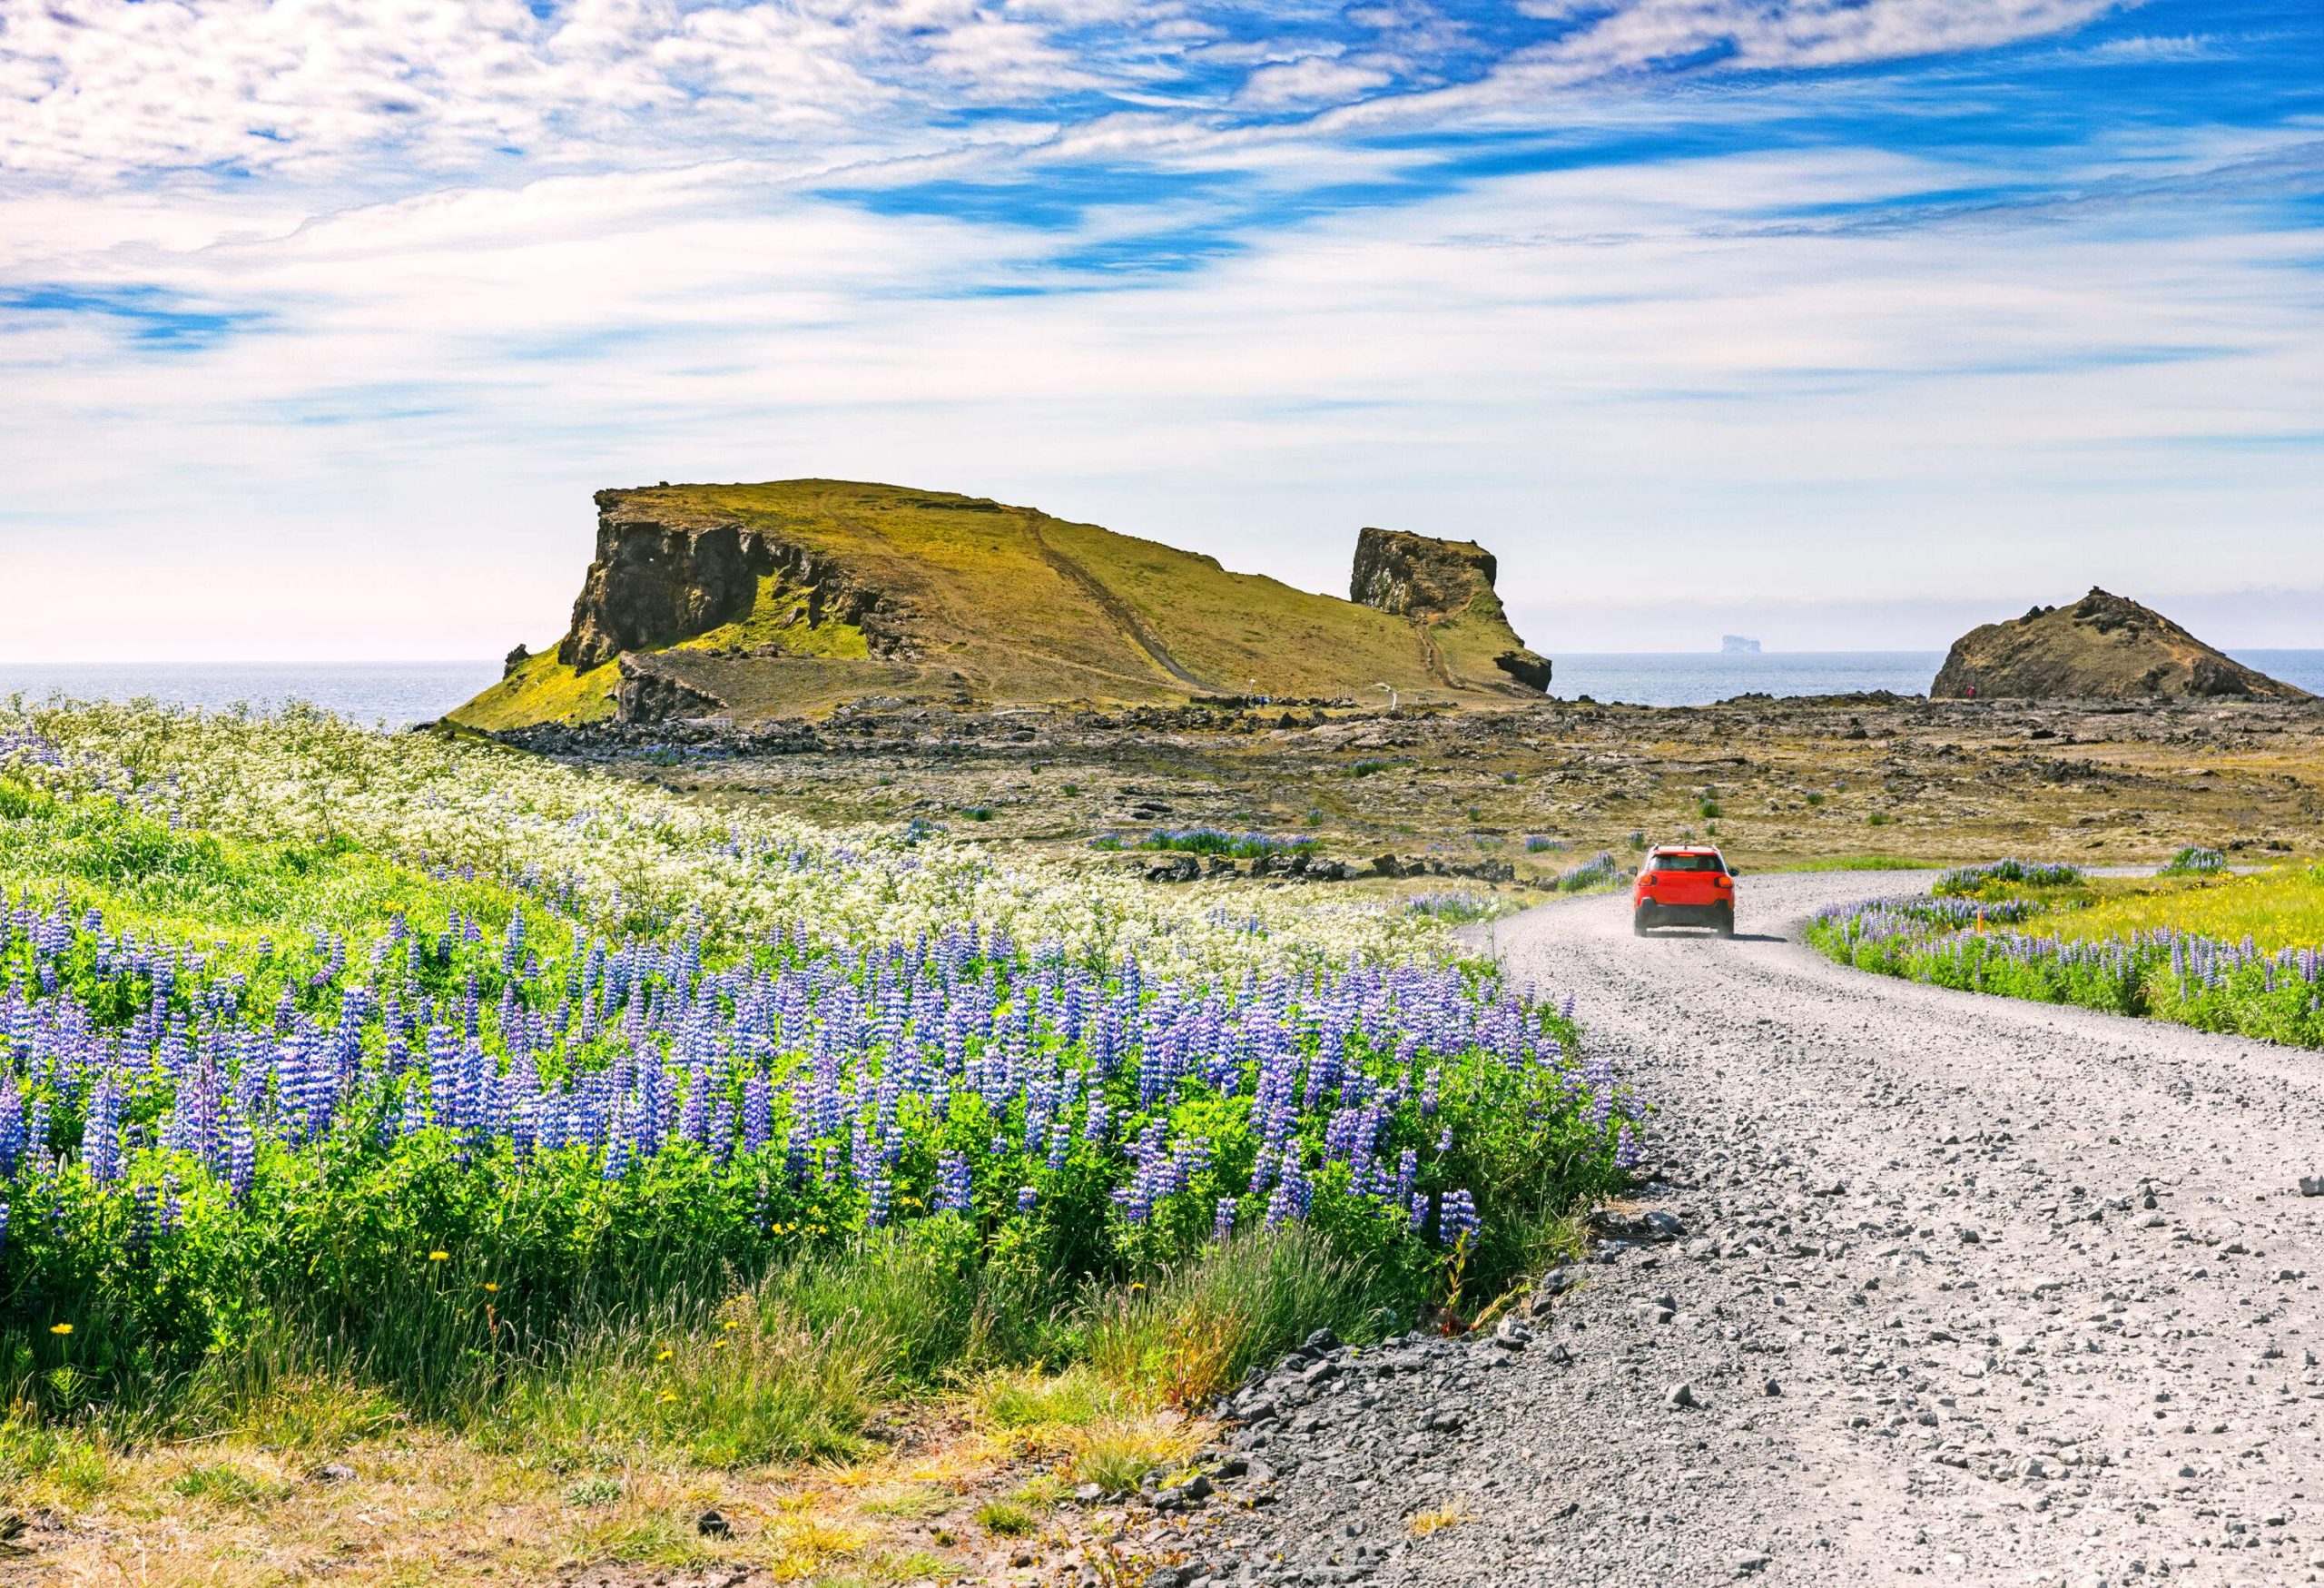 A red car travelling on an unpaved road in the middle of a field of lush lupine flowers in full bloom next to an iconic rock mountain.